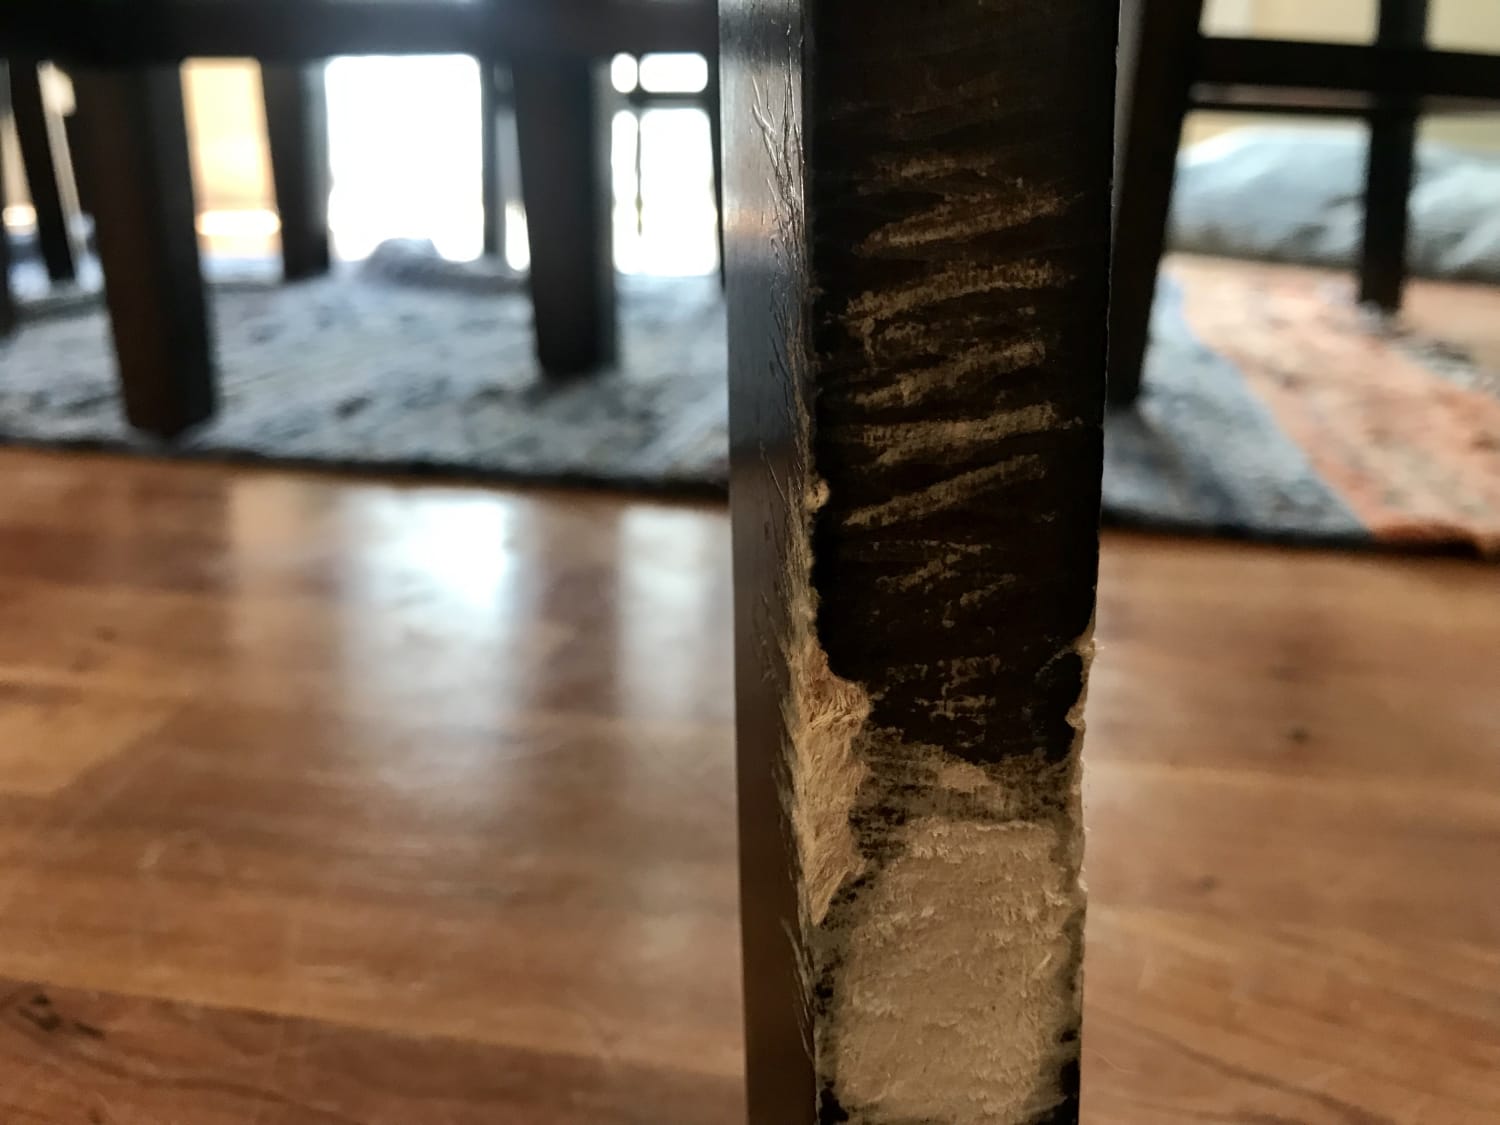 Furniture Touchup Markers - How to Fix Small Damages